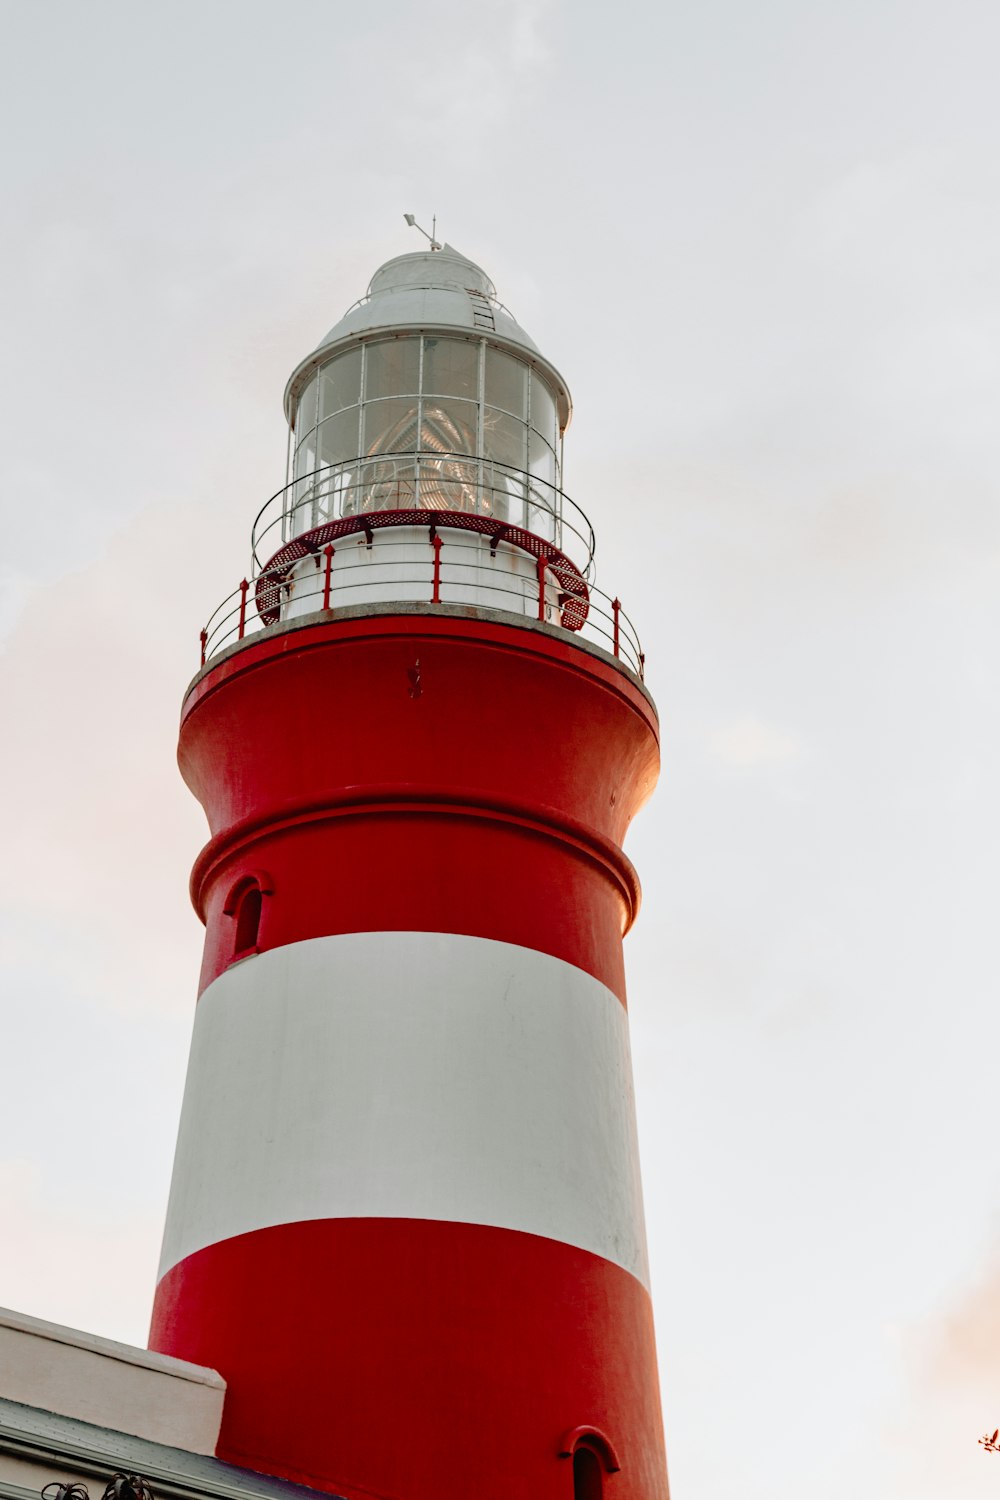 low-angle photography of white and red lighthouse during daytime